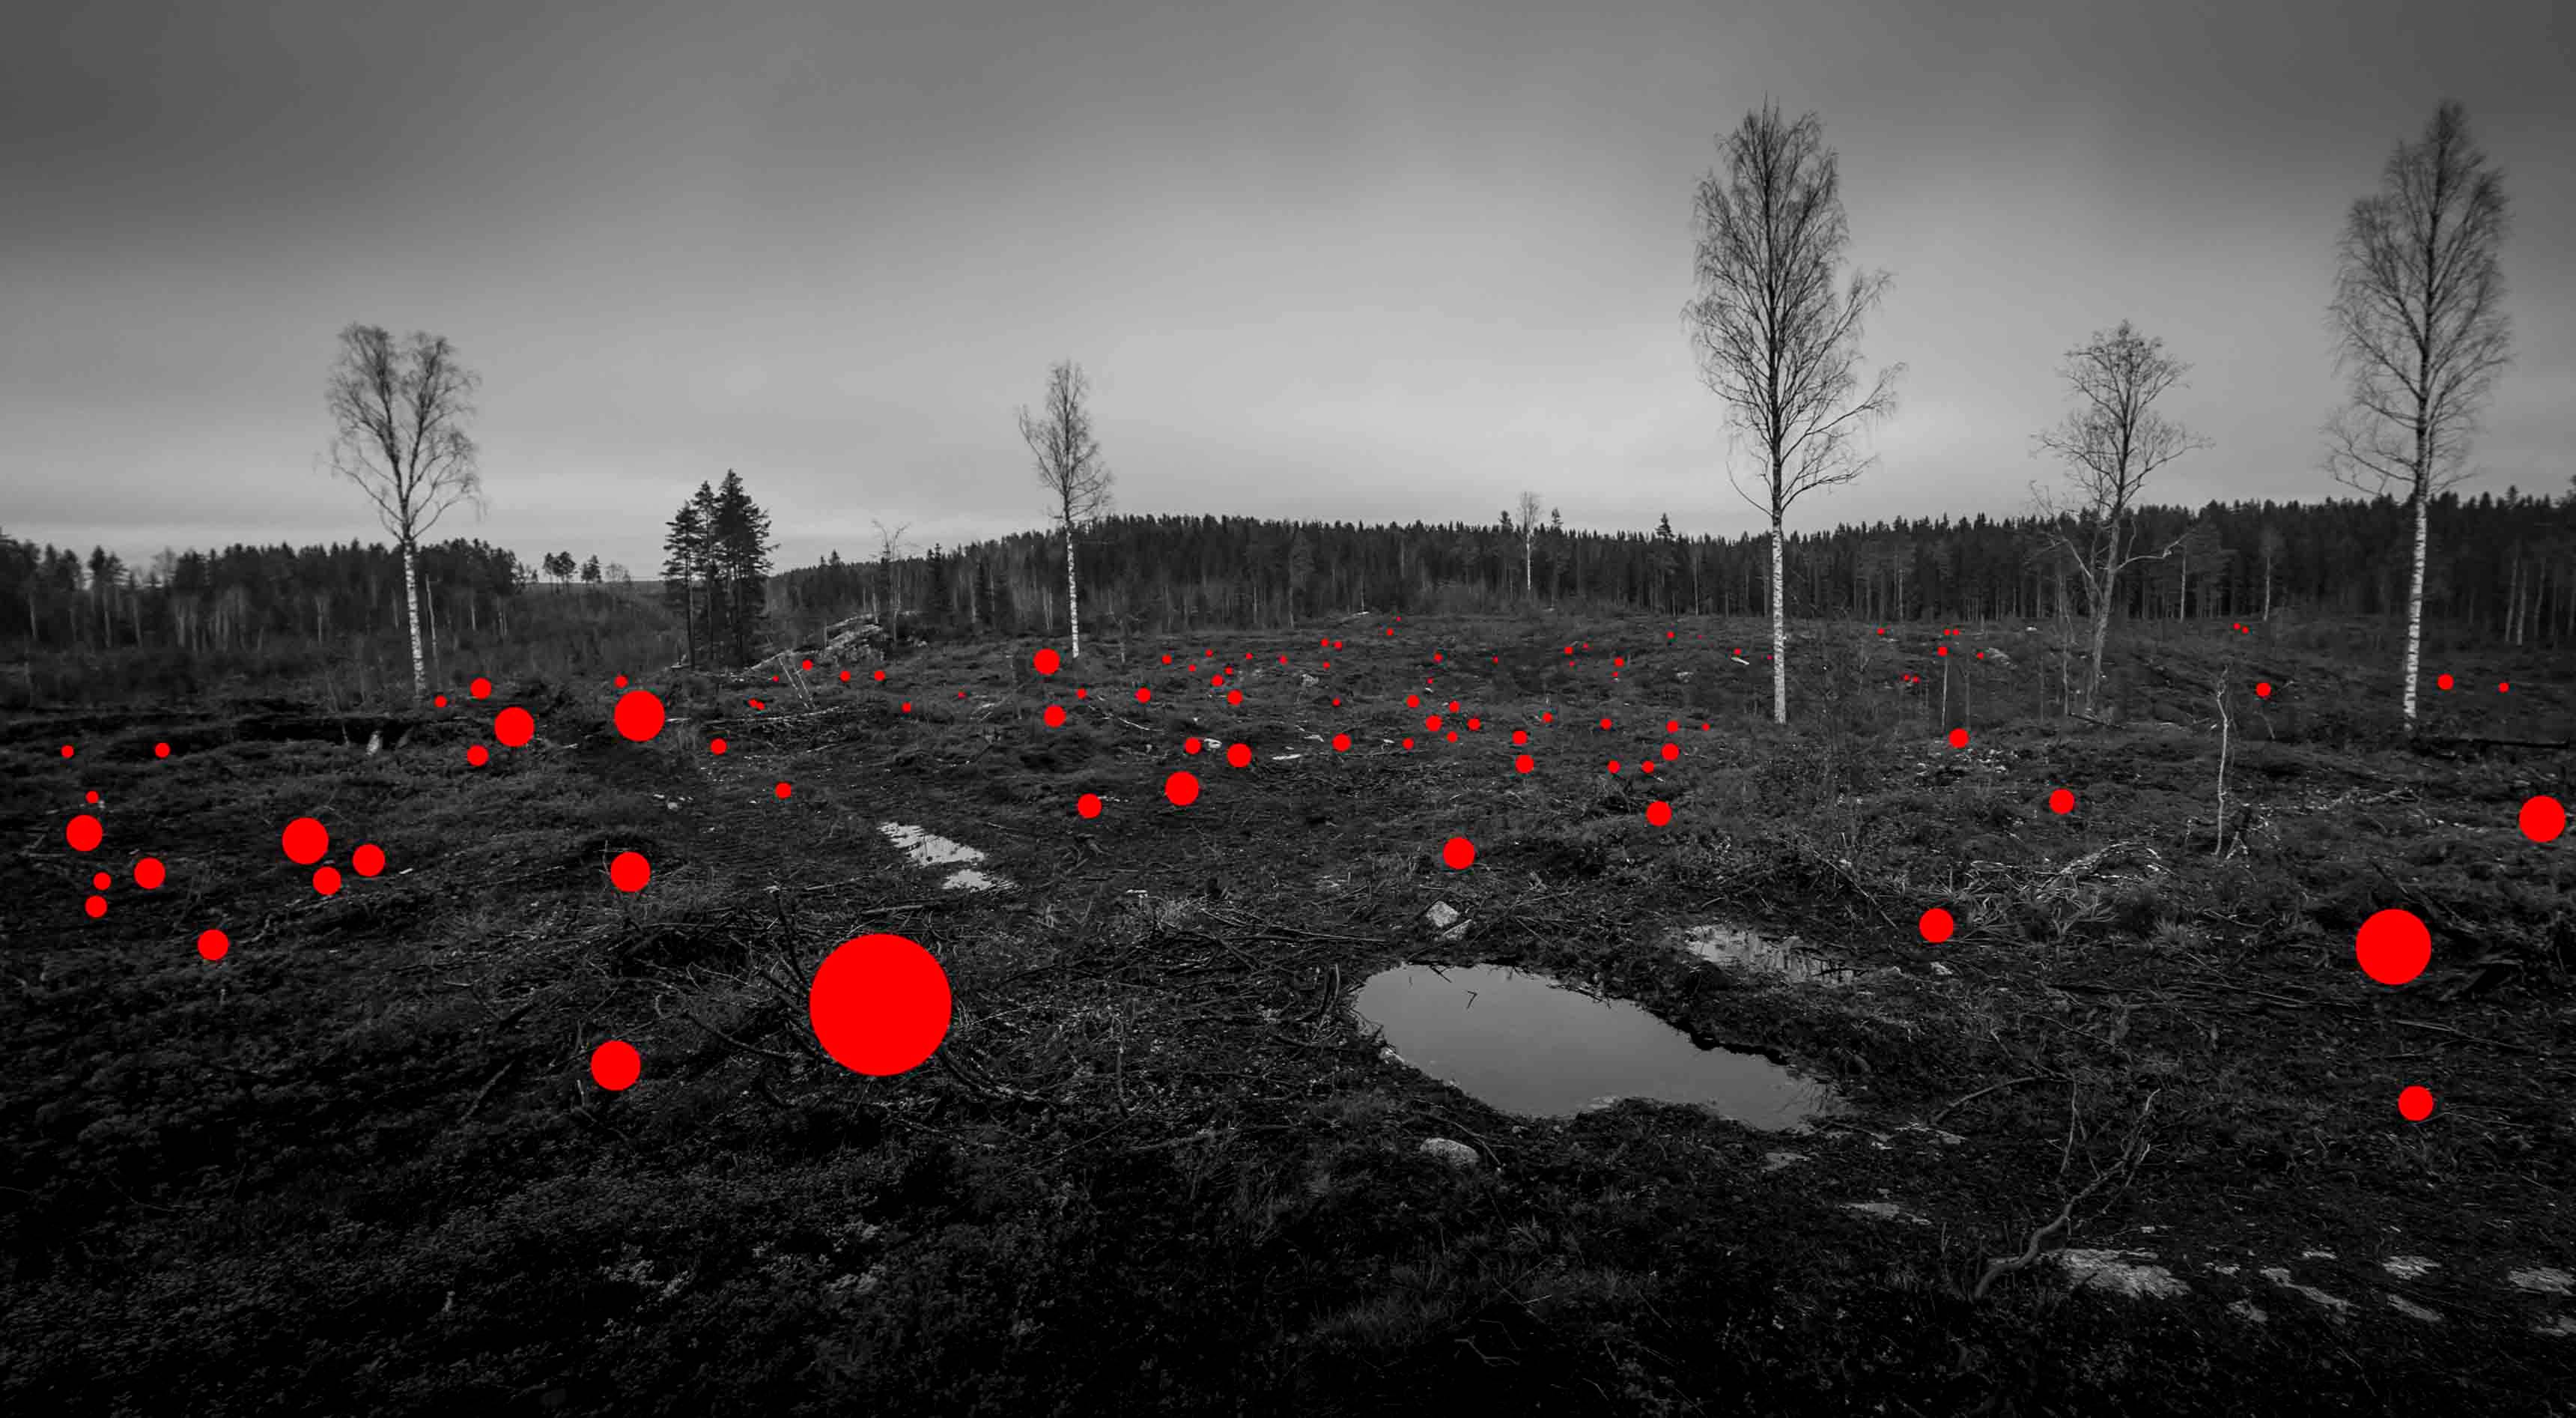 “100 Mistakes Made by Previous Generation”, 100 hectares, Jaakko Kahilaniemi, 2017.